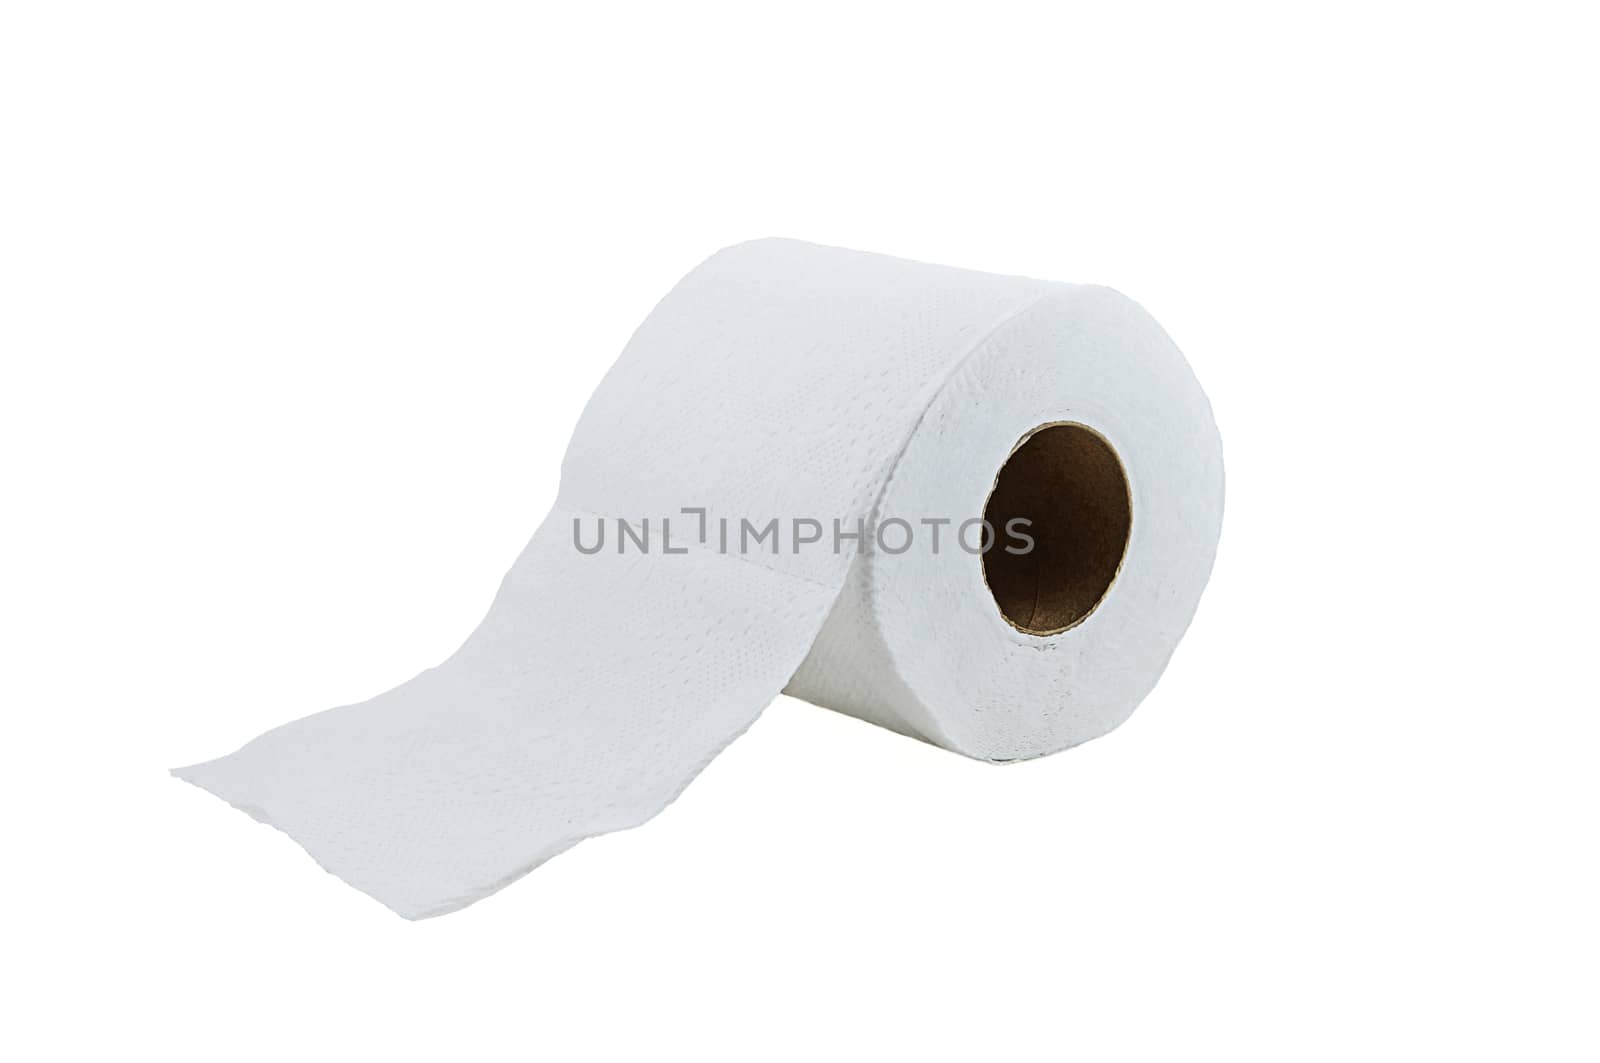 Toilet paper isolated on a white background with clipping path